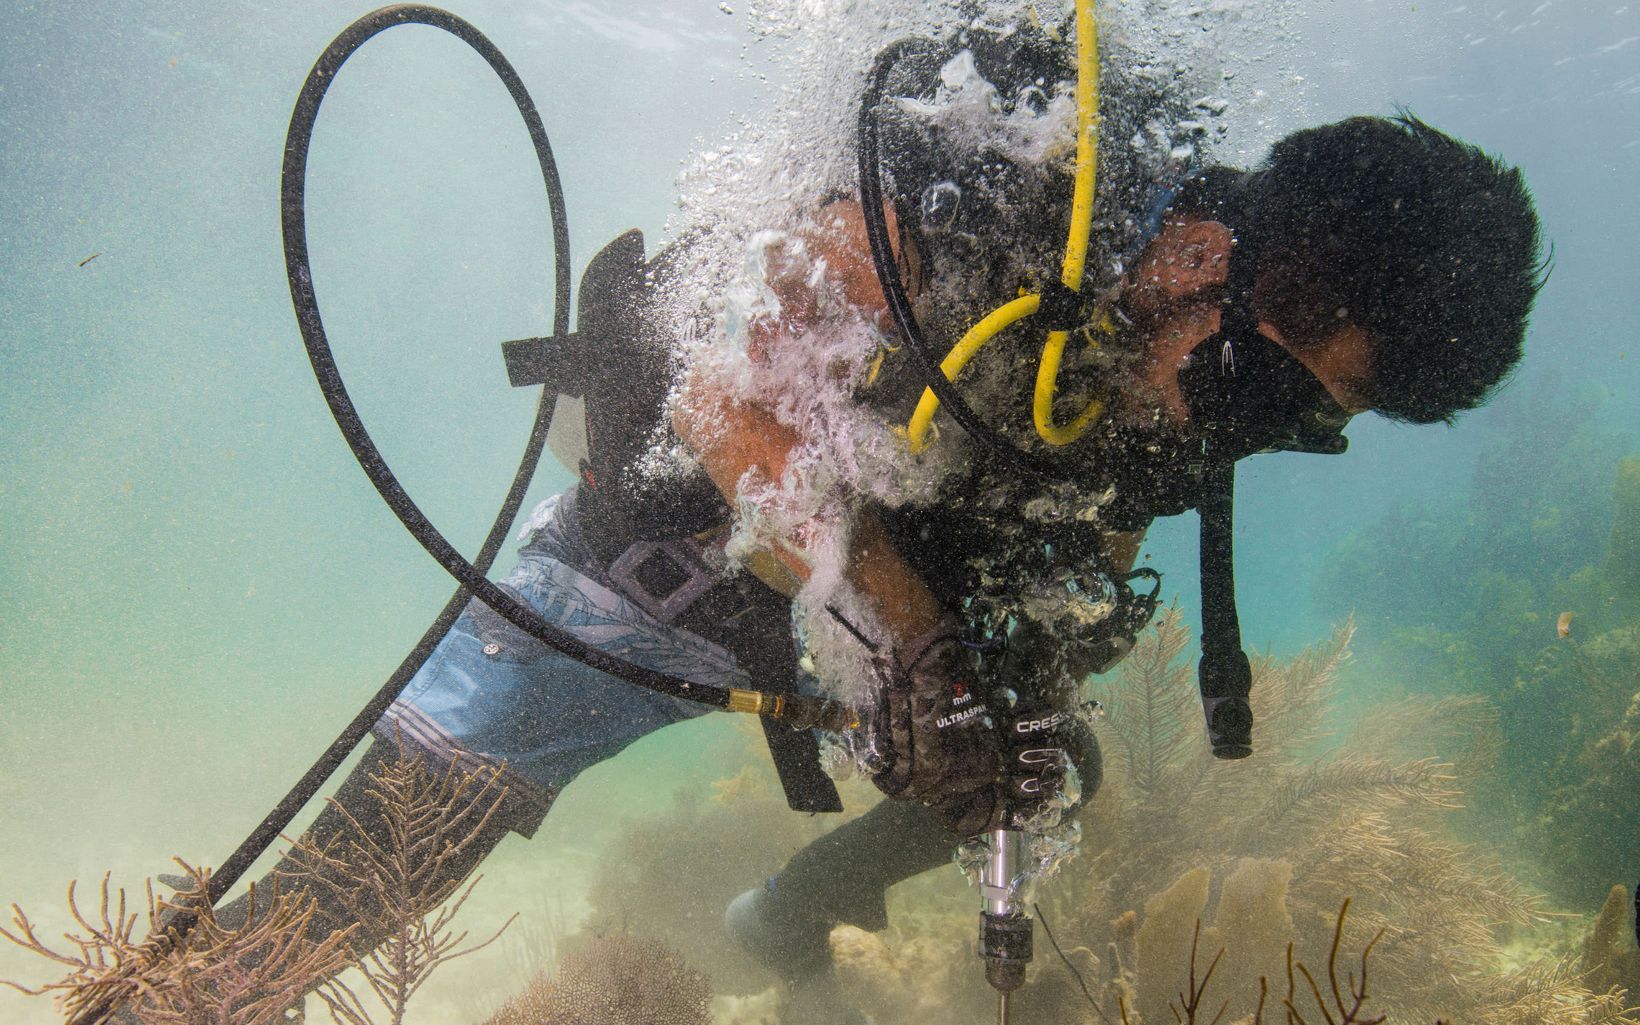 A brigade member learns to use a drill underwater during the second day of coral reef rapid-response training for natural disasters. Following a hurricane, these brigade members would use drills to secure corals to the reef to prepare for repairing reefs following hurricanes. In the Mesoamerican Barrier Reef at Puerto Morelos National Marine Park. Puerto Morelos, Mexico. June 2018.  